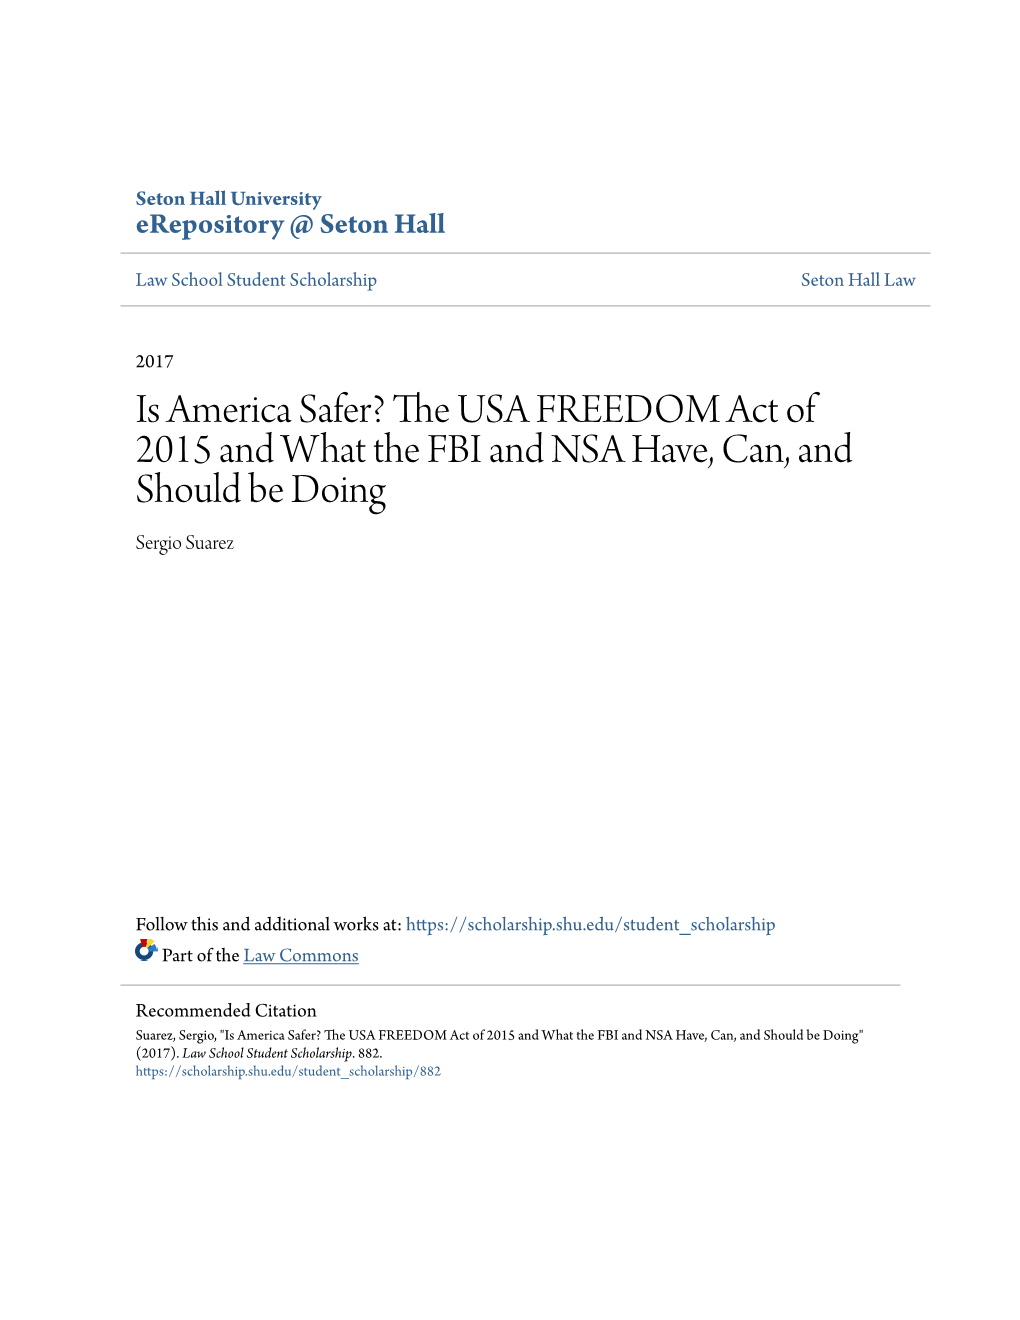 The USA FREEDOM Act of 2015 and What the FBI and NSA Have, Can, and Should Be Doing